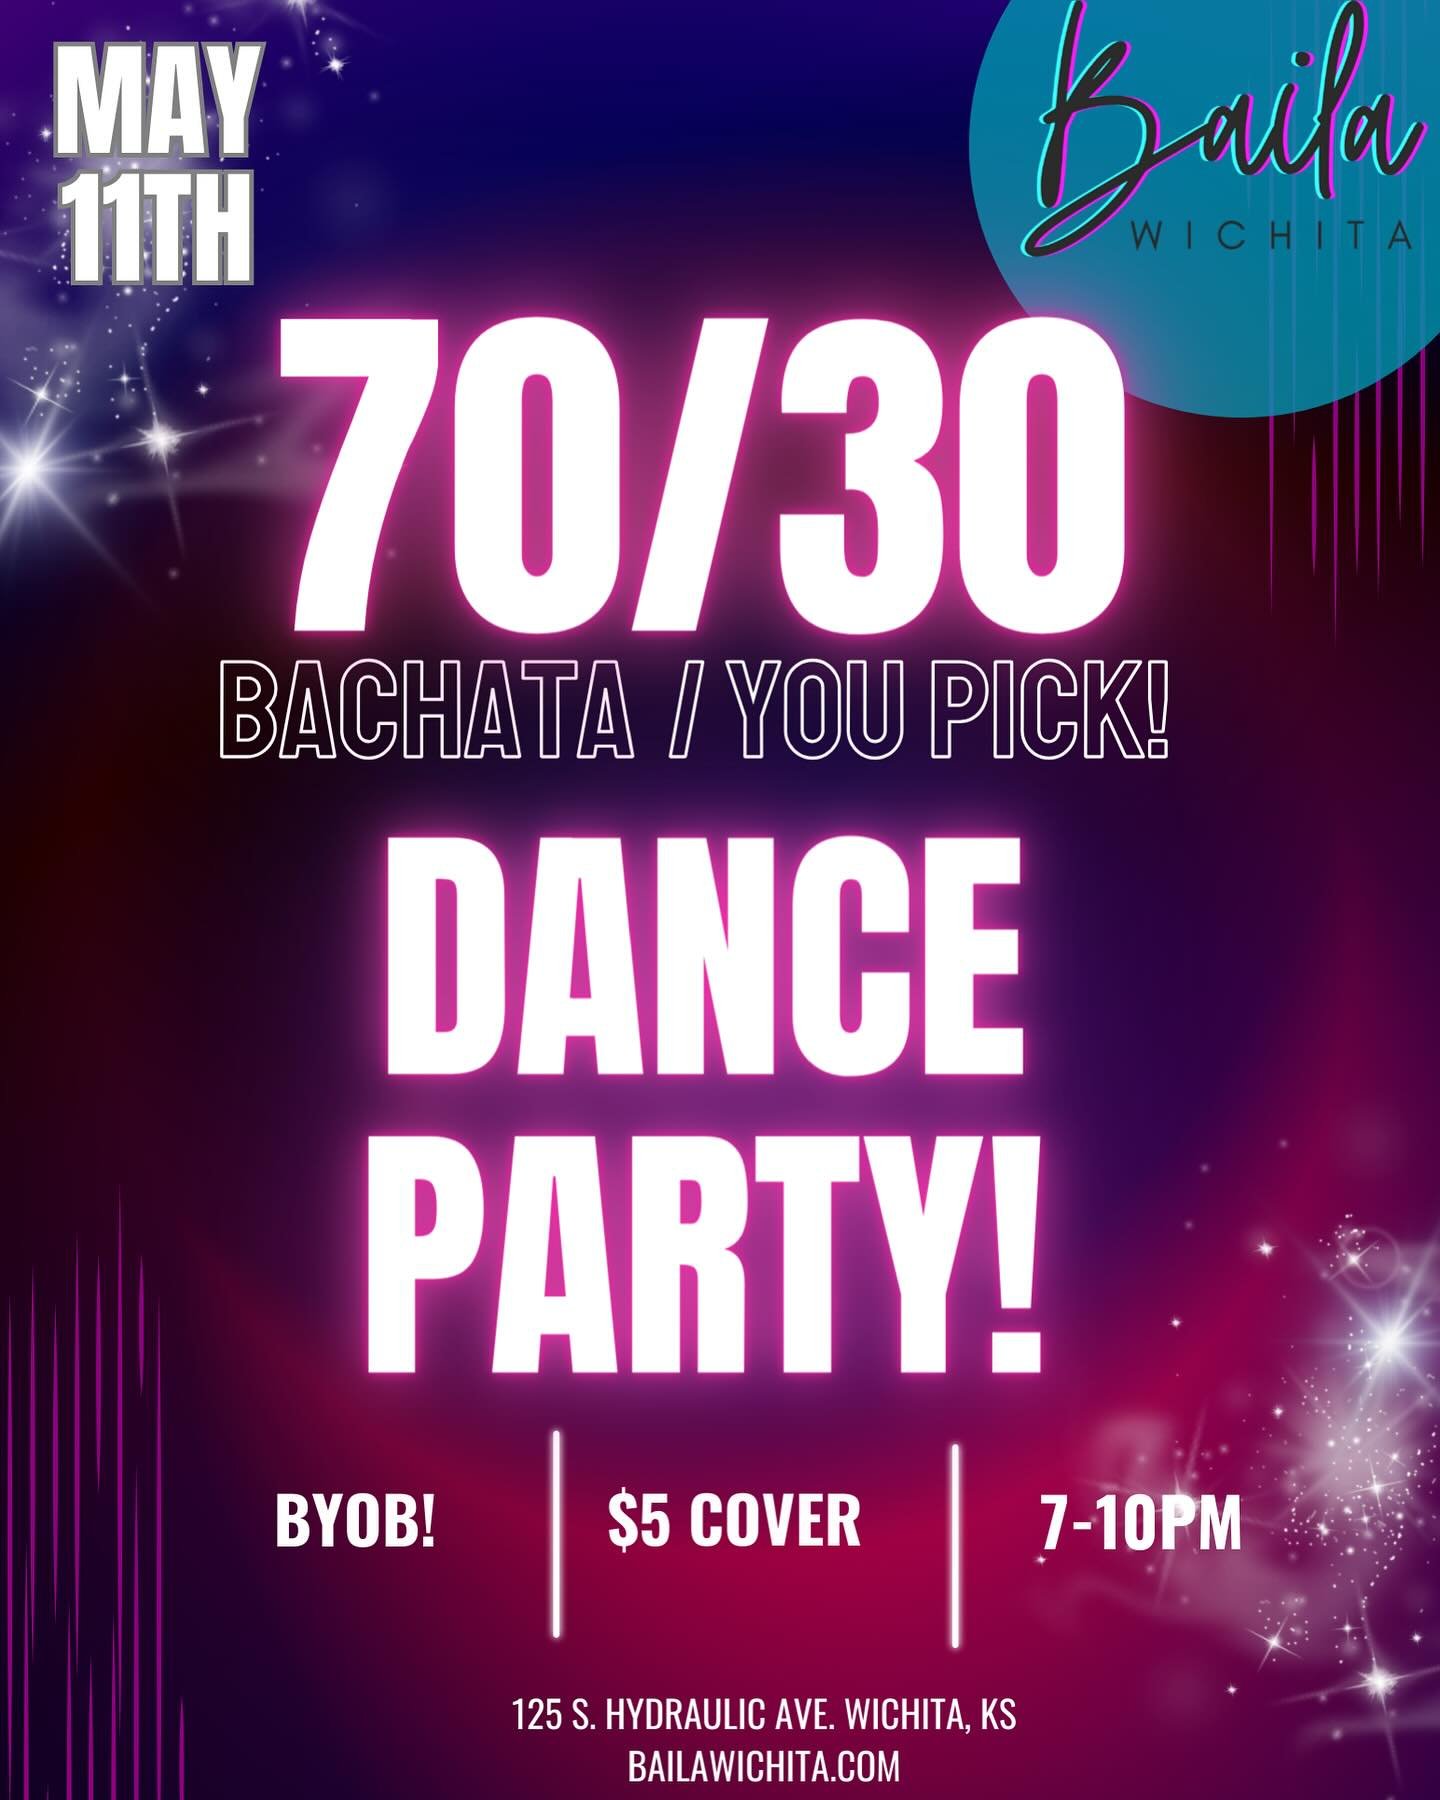 Join us THIS SATURDAY, 5/11 from 7-10pm at our studio social where we will be playing 70% Bachata and 30% other genres!

Entry is $5 and includes a Bachata lesson with Hannah!
&bull;
&bull;
7-8pm Beginner Bachata lesson with Hannah
8-10pm Social danc